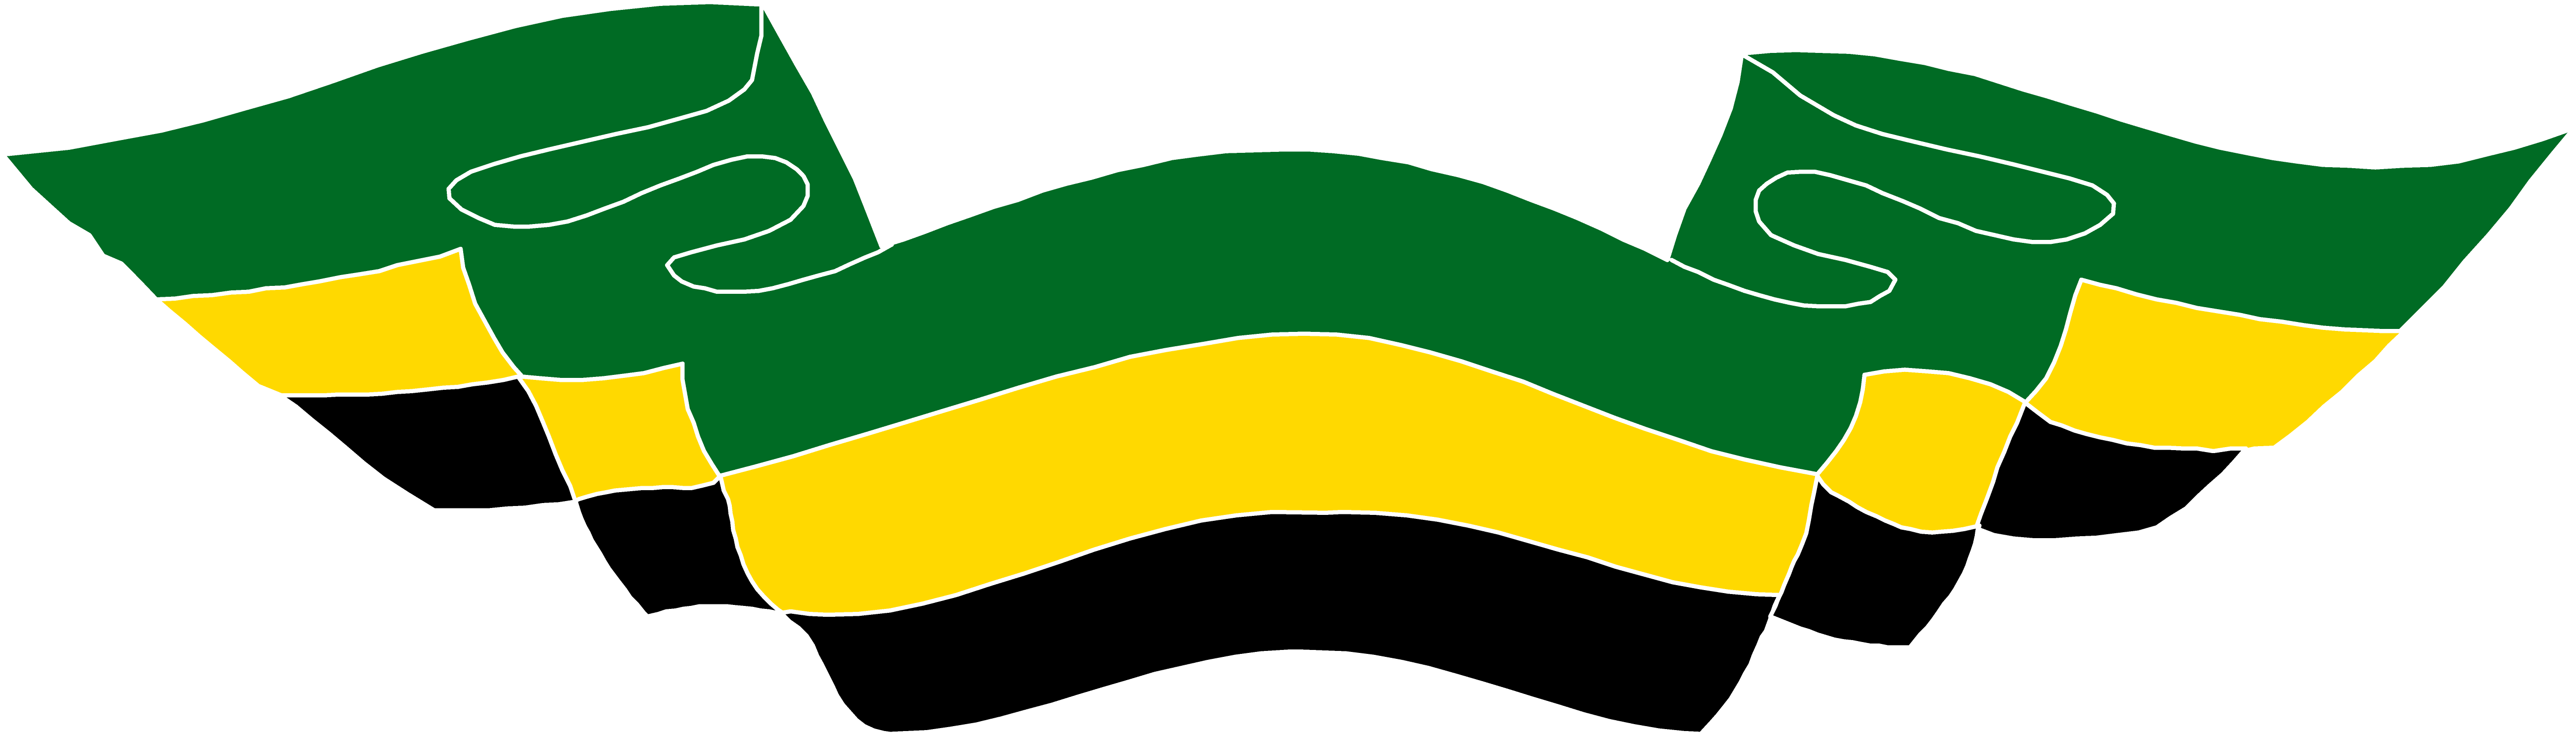 Jamaica Flag Png PNG Image